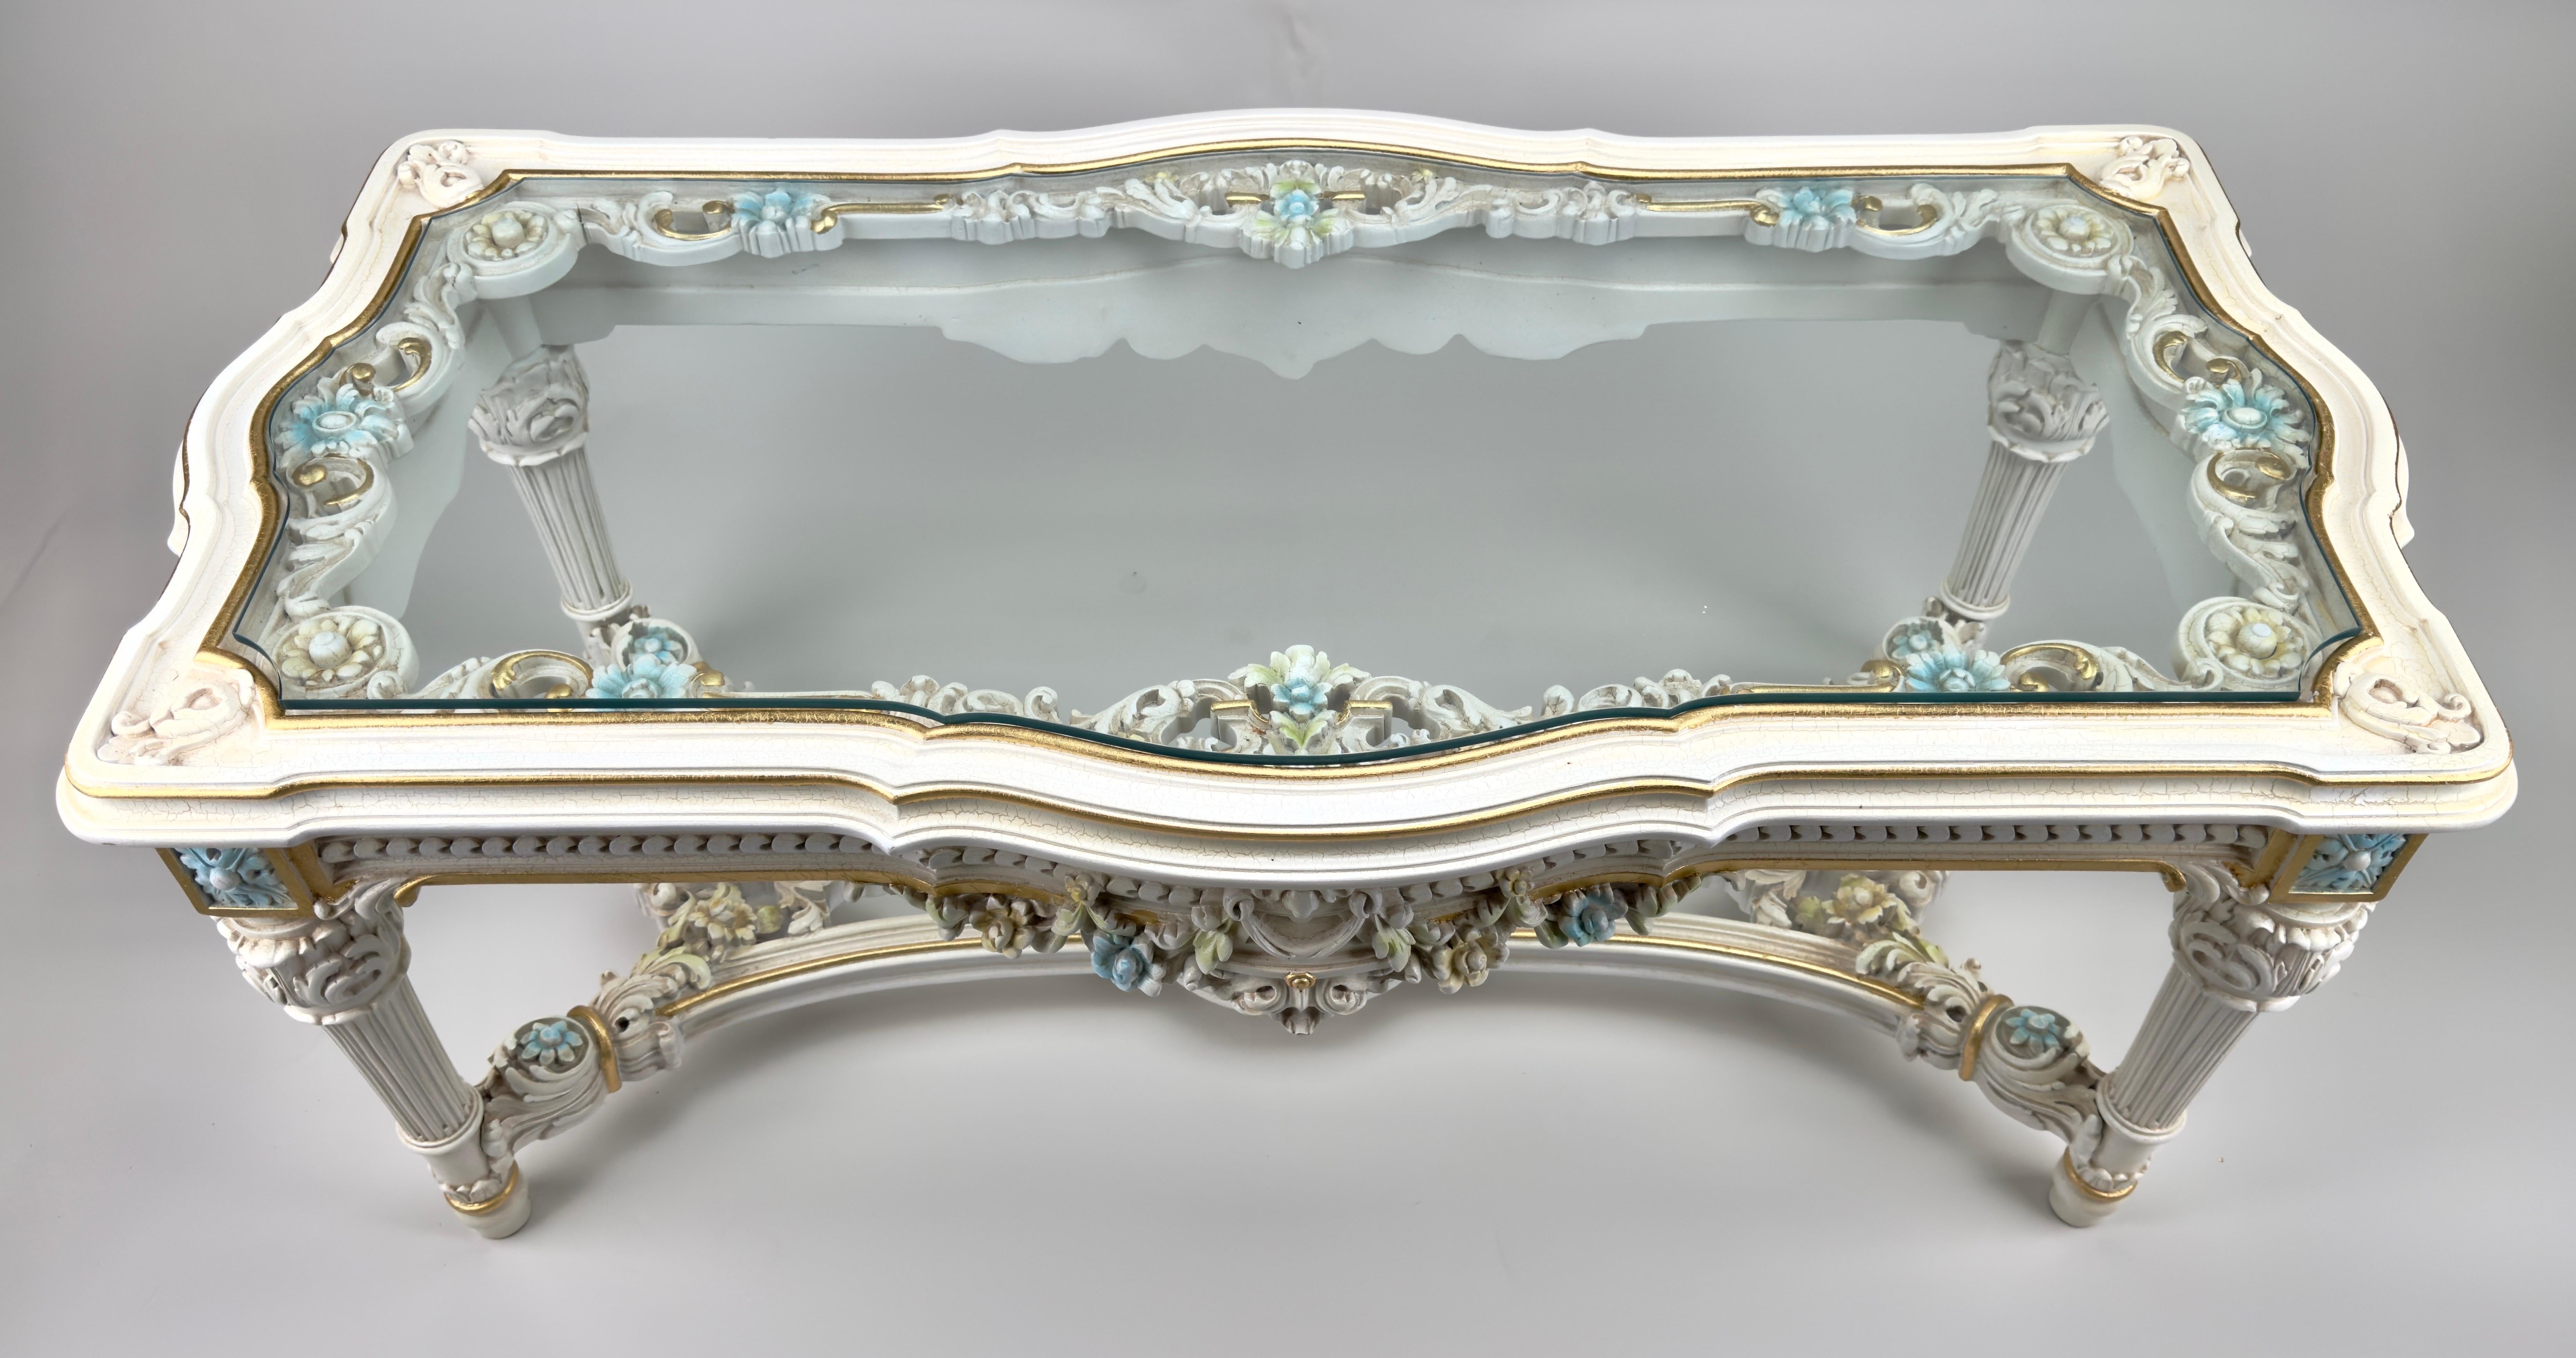 An Italian Neo-Classical Baroque style coffee or cocktail table—an exquisite fusion of opulence and artistry. Crafted with meticulous attention to detail, 
the table's surface is adorned with finely carved floral patterns, each intricately detailed